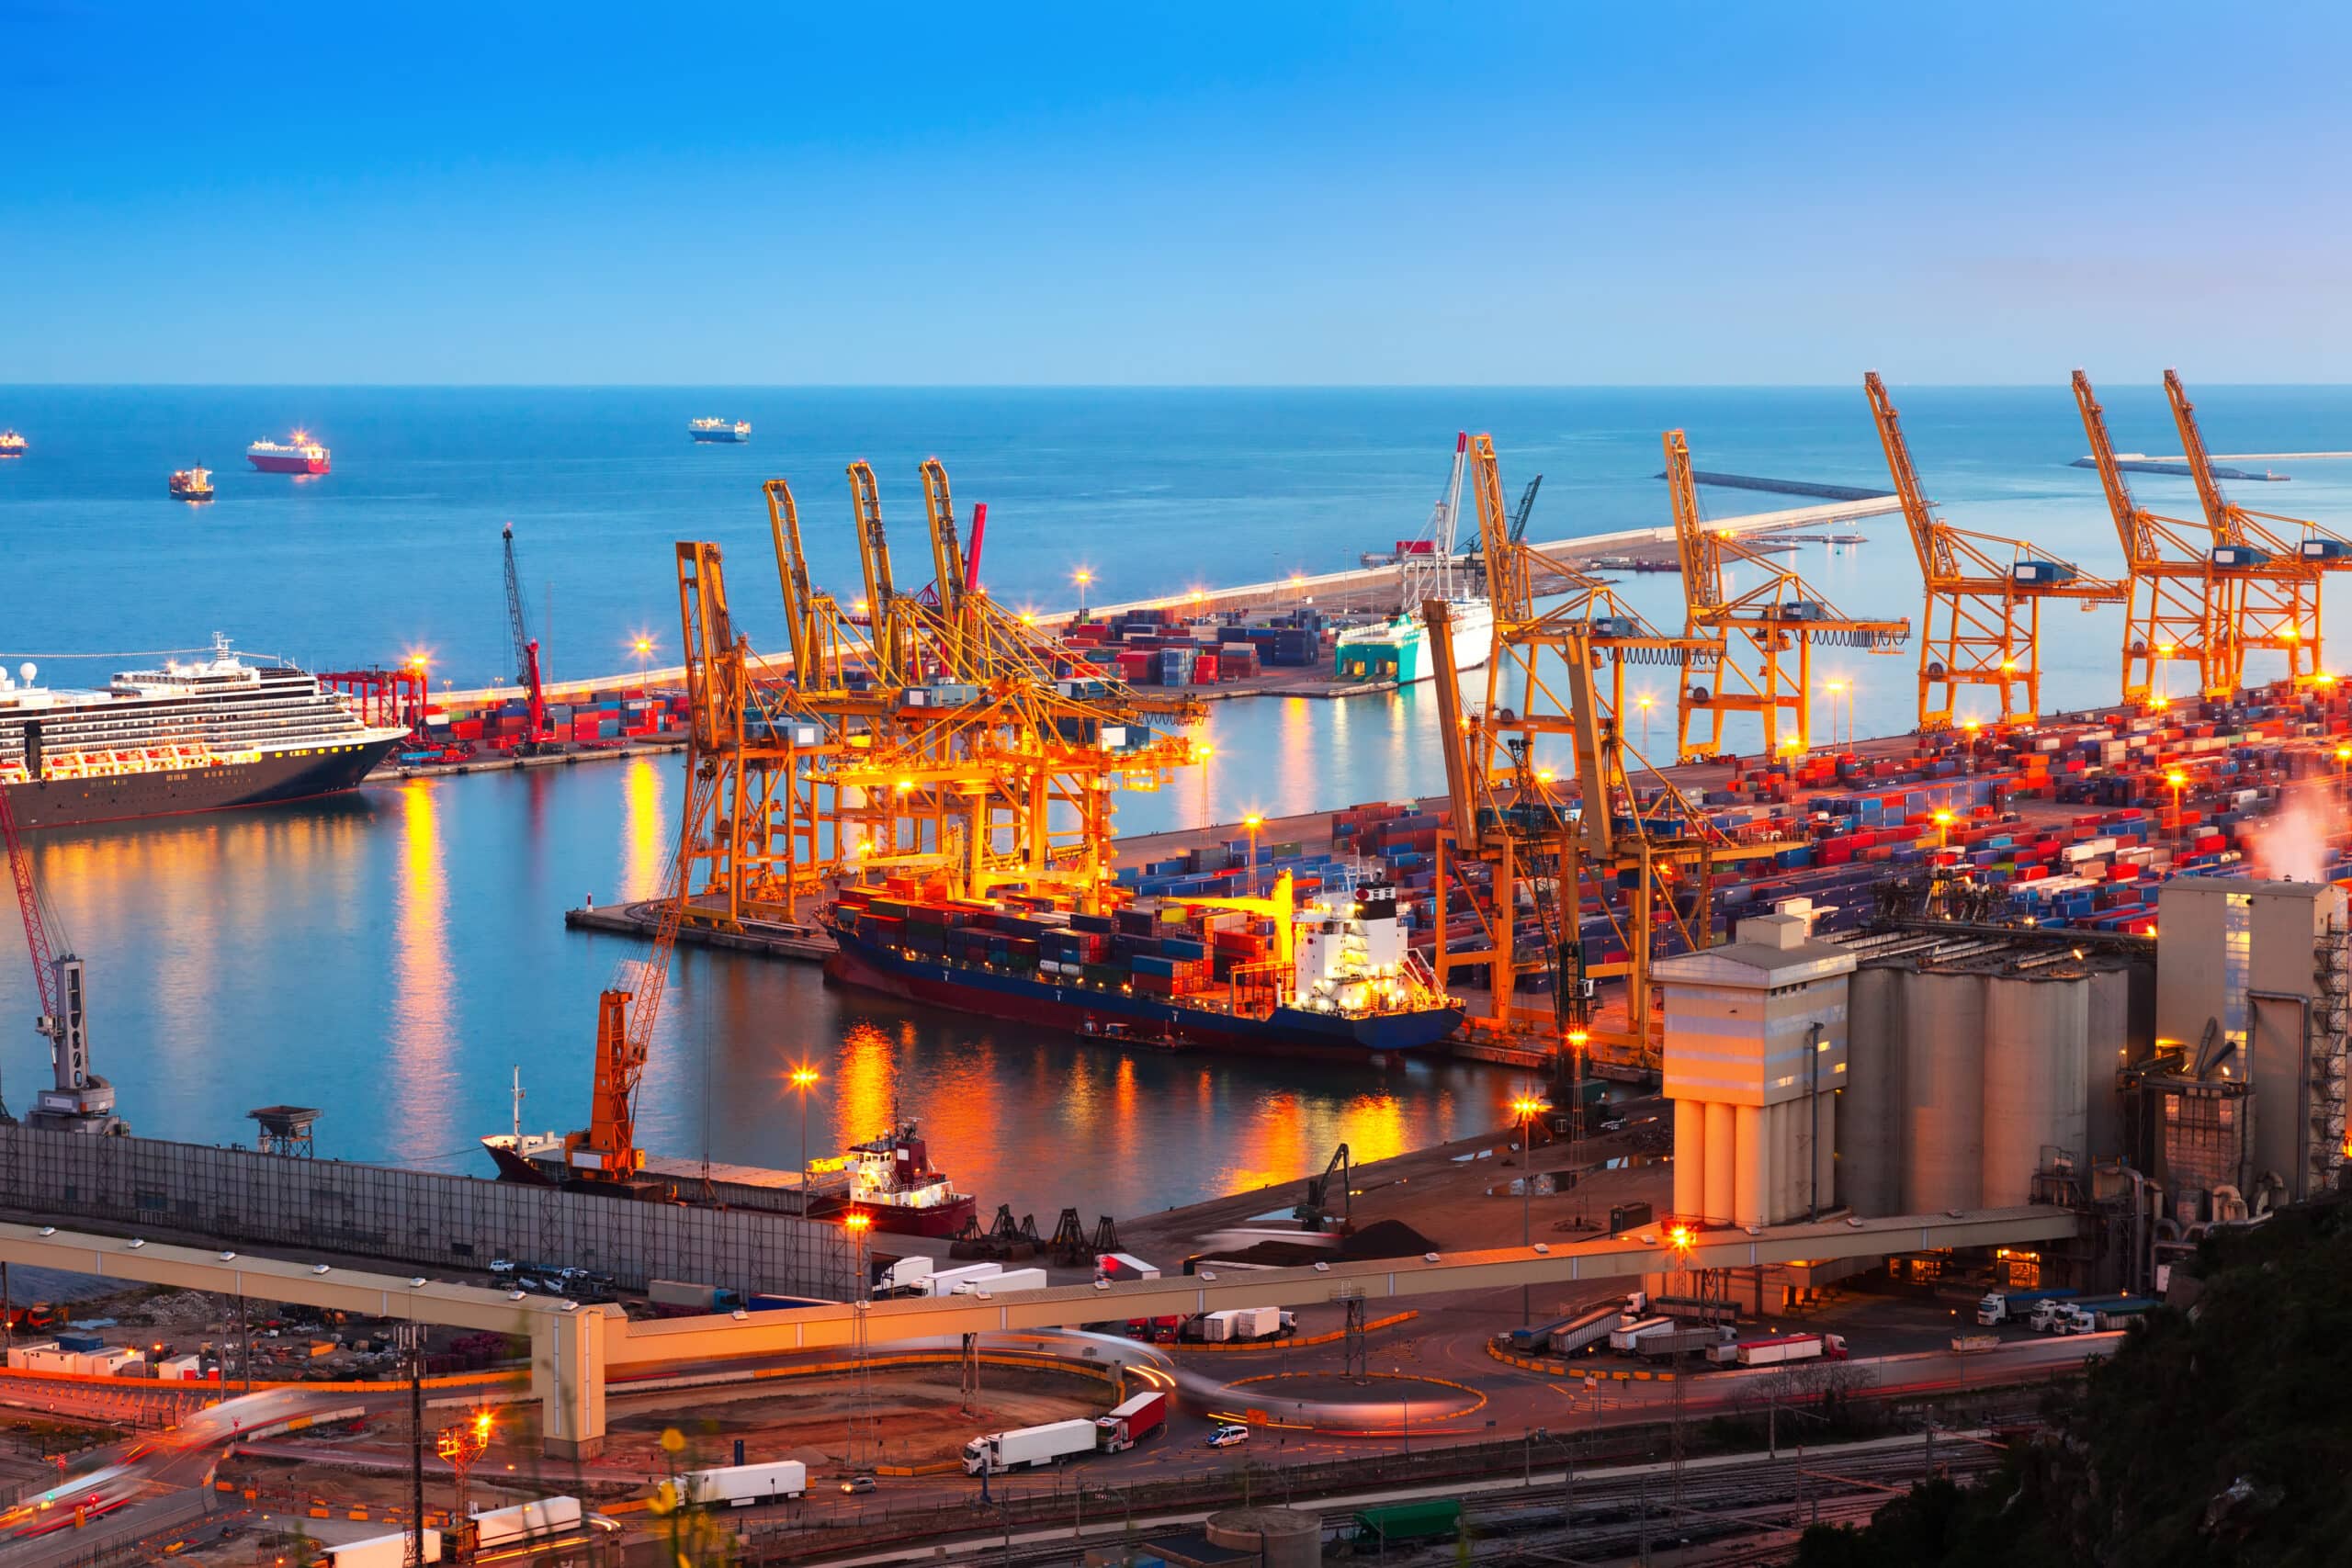 Custom Solutions in Sea Shipping Services to Fit Your Business